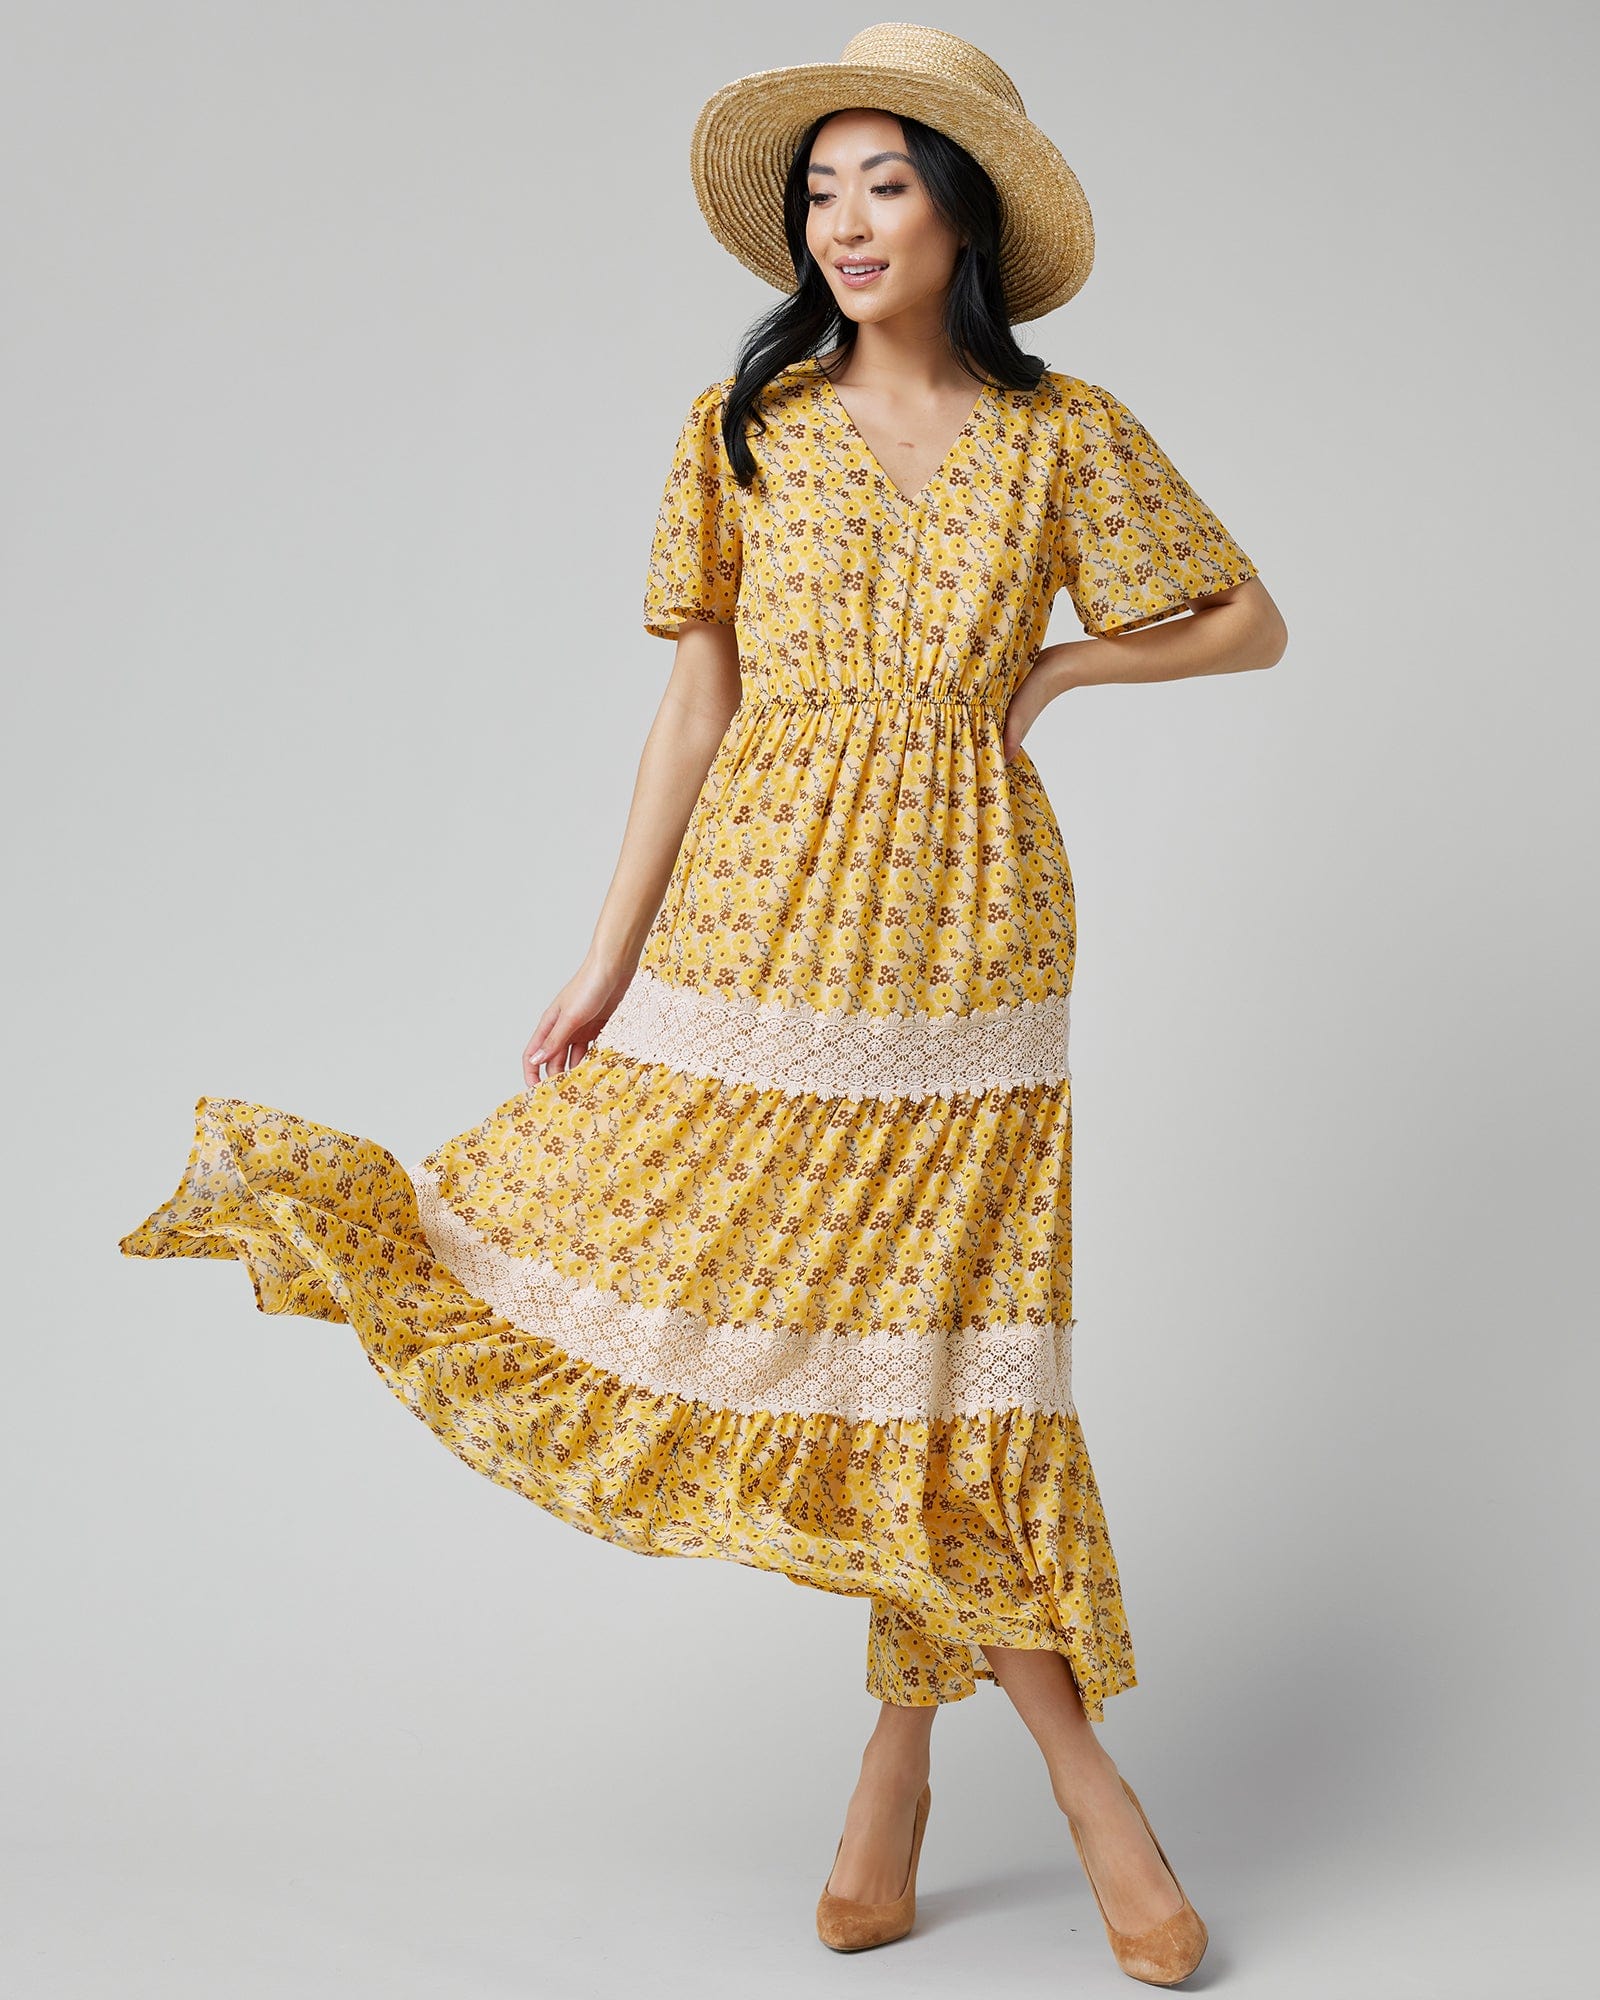 Woman in a short sleeve, maxi-length, yellow with floral print dress